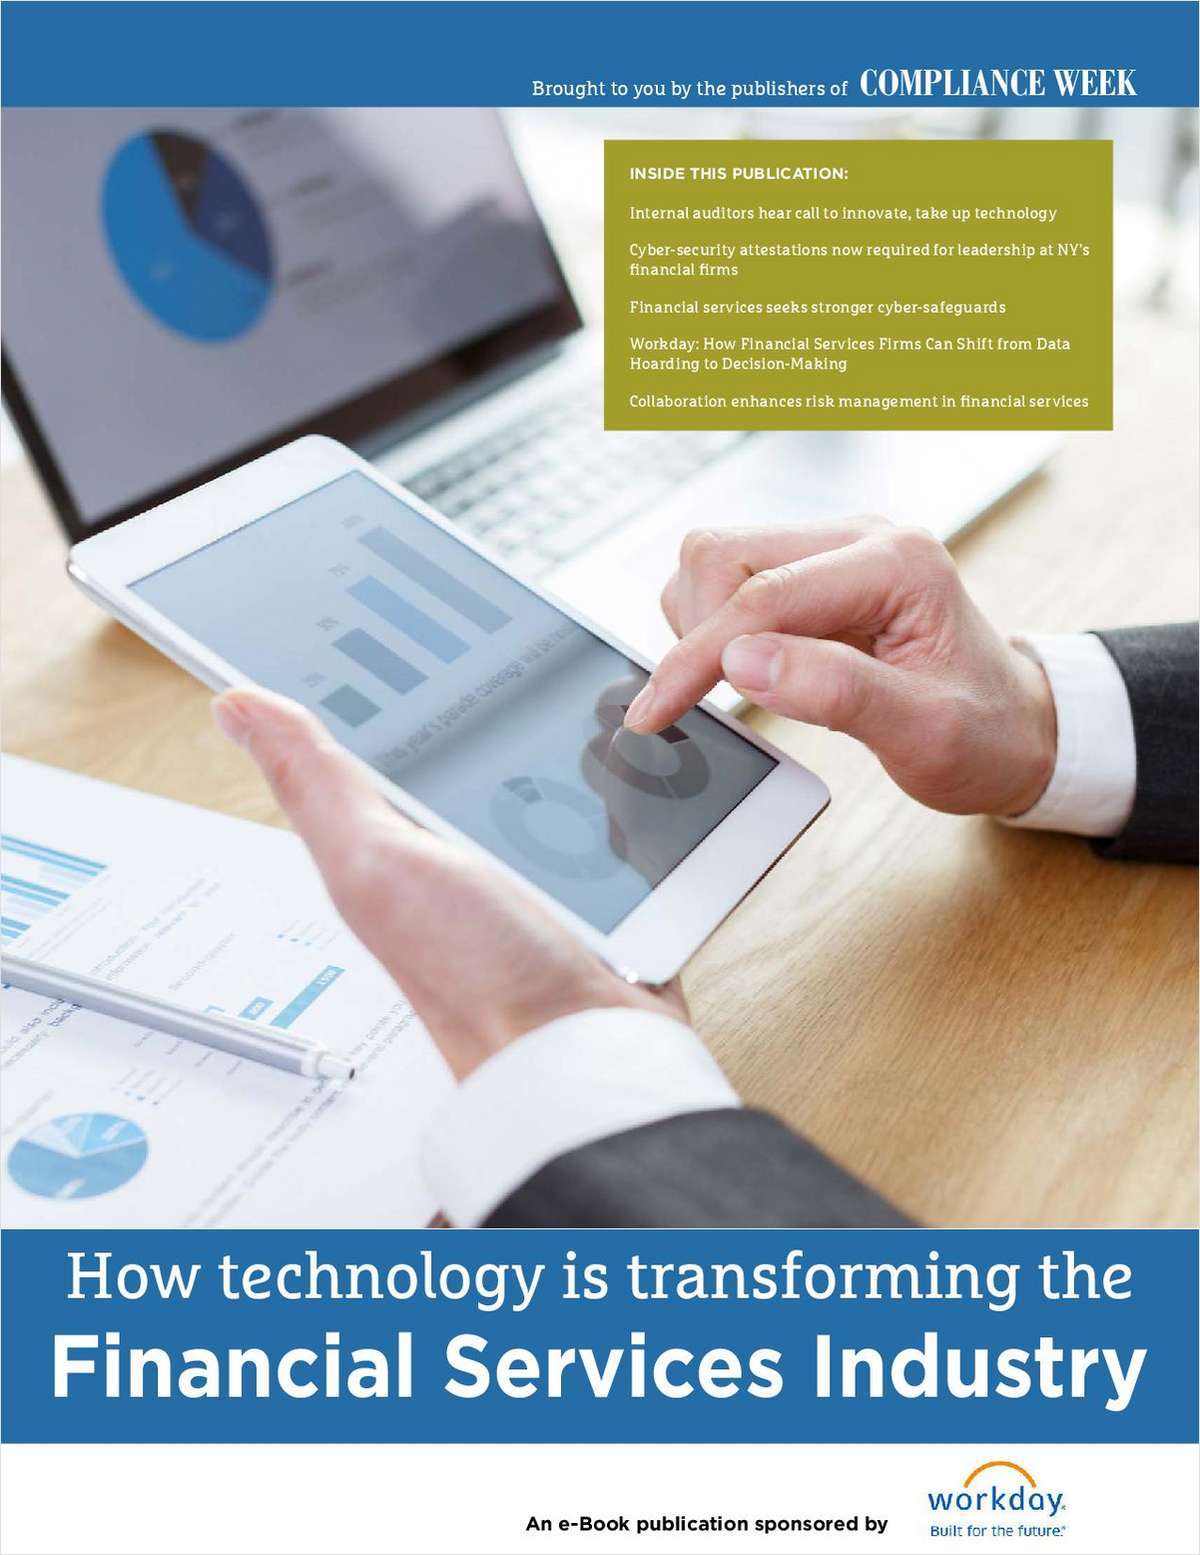 How Technology Is Transforming the Financial Services Industry